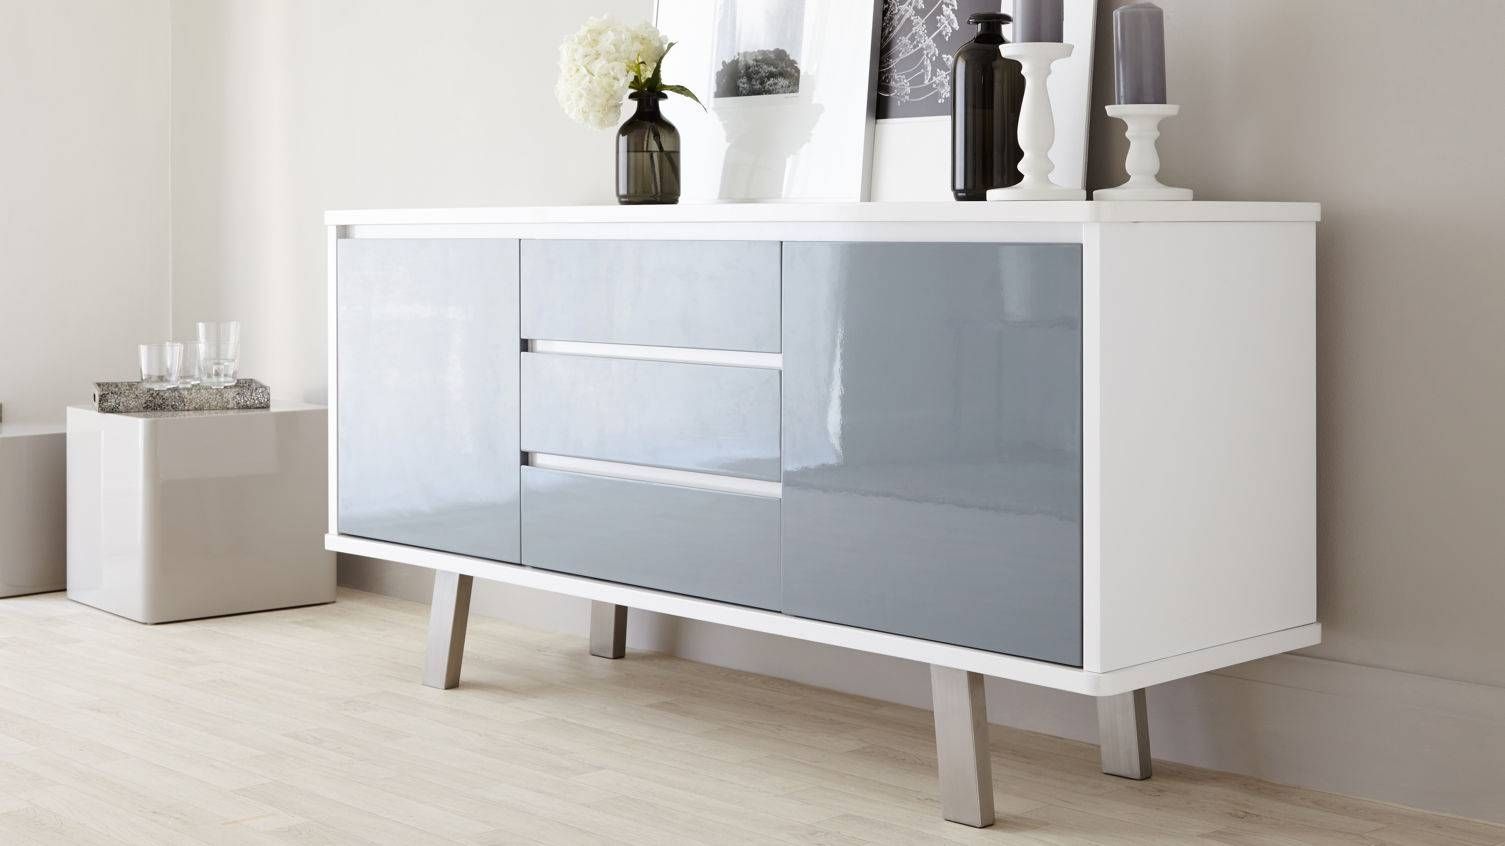 Furniture: Mid Century Modern Sideboard For Inspiring Interior With White Wooden Sideboards (View 15 of 20)